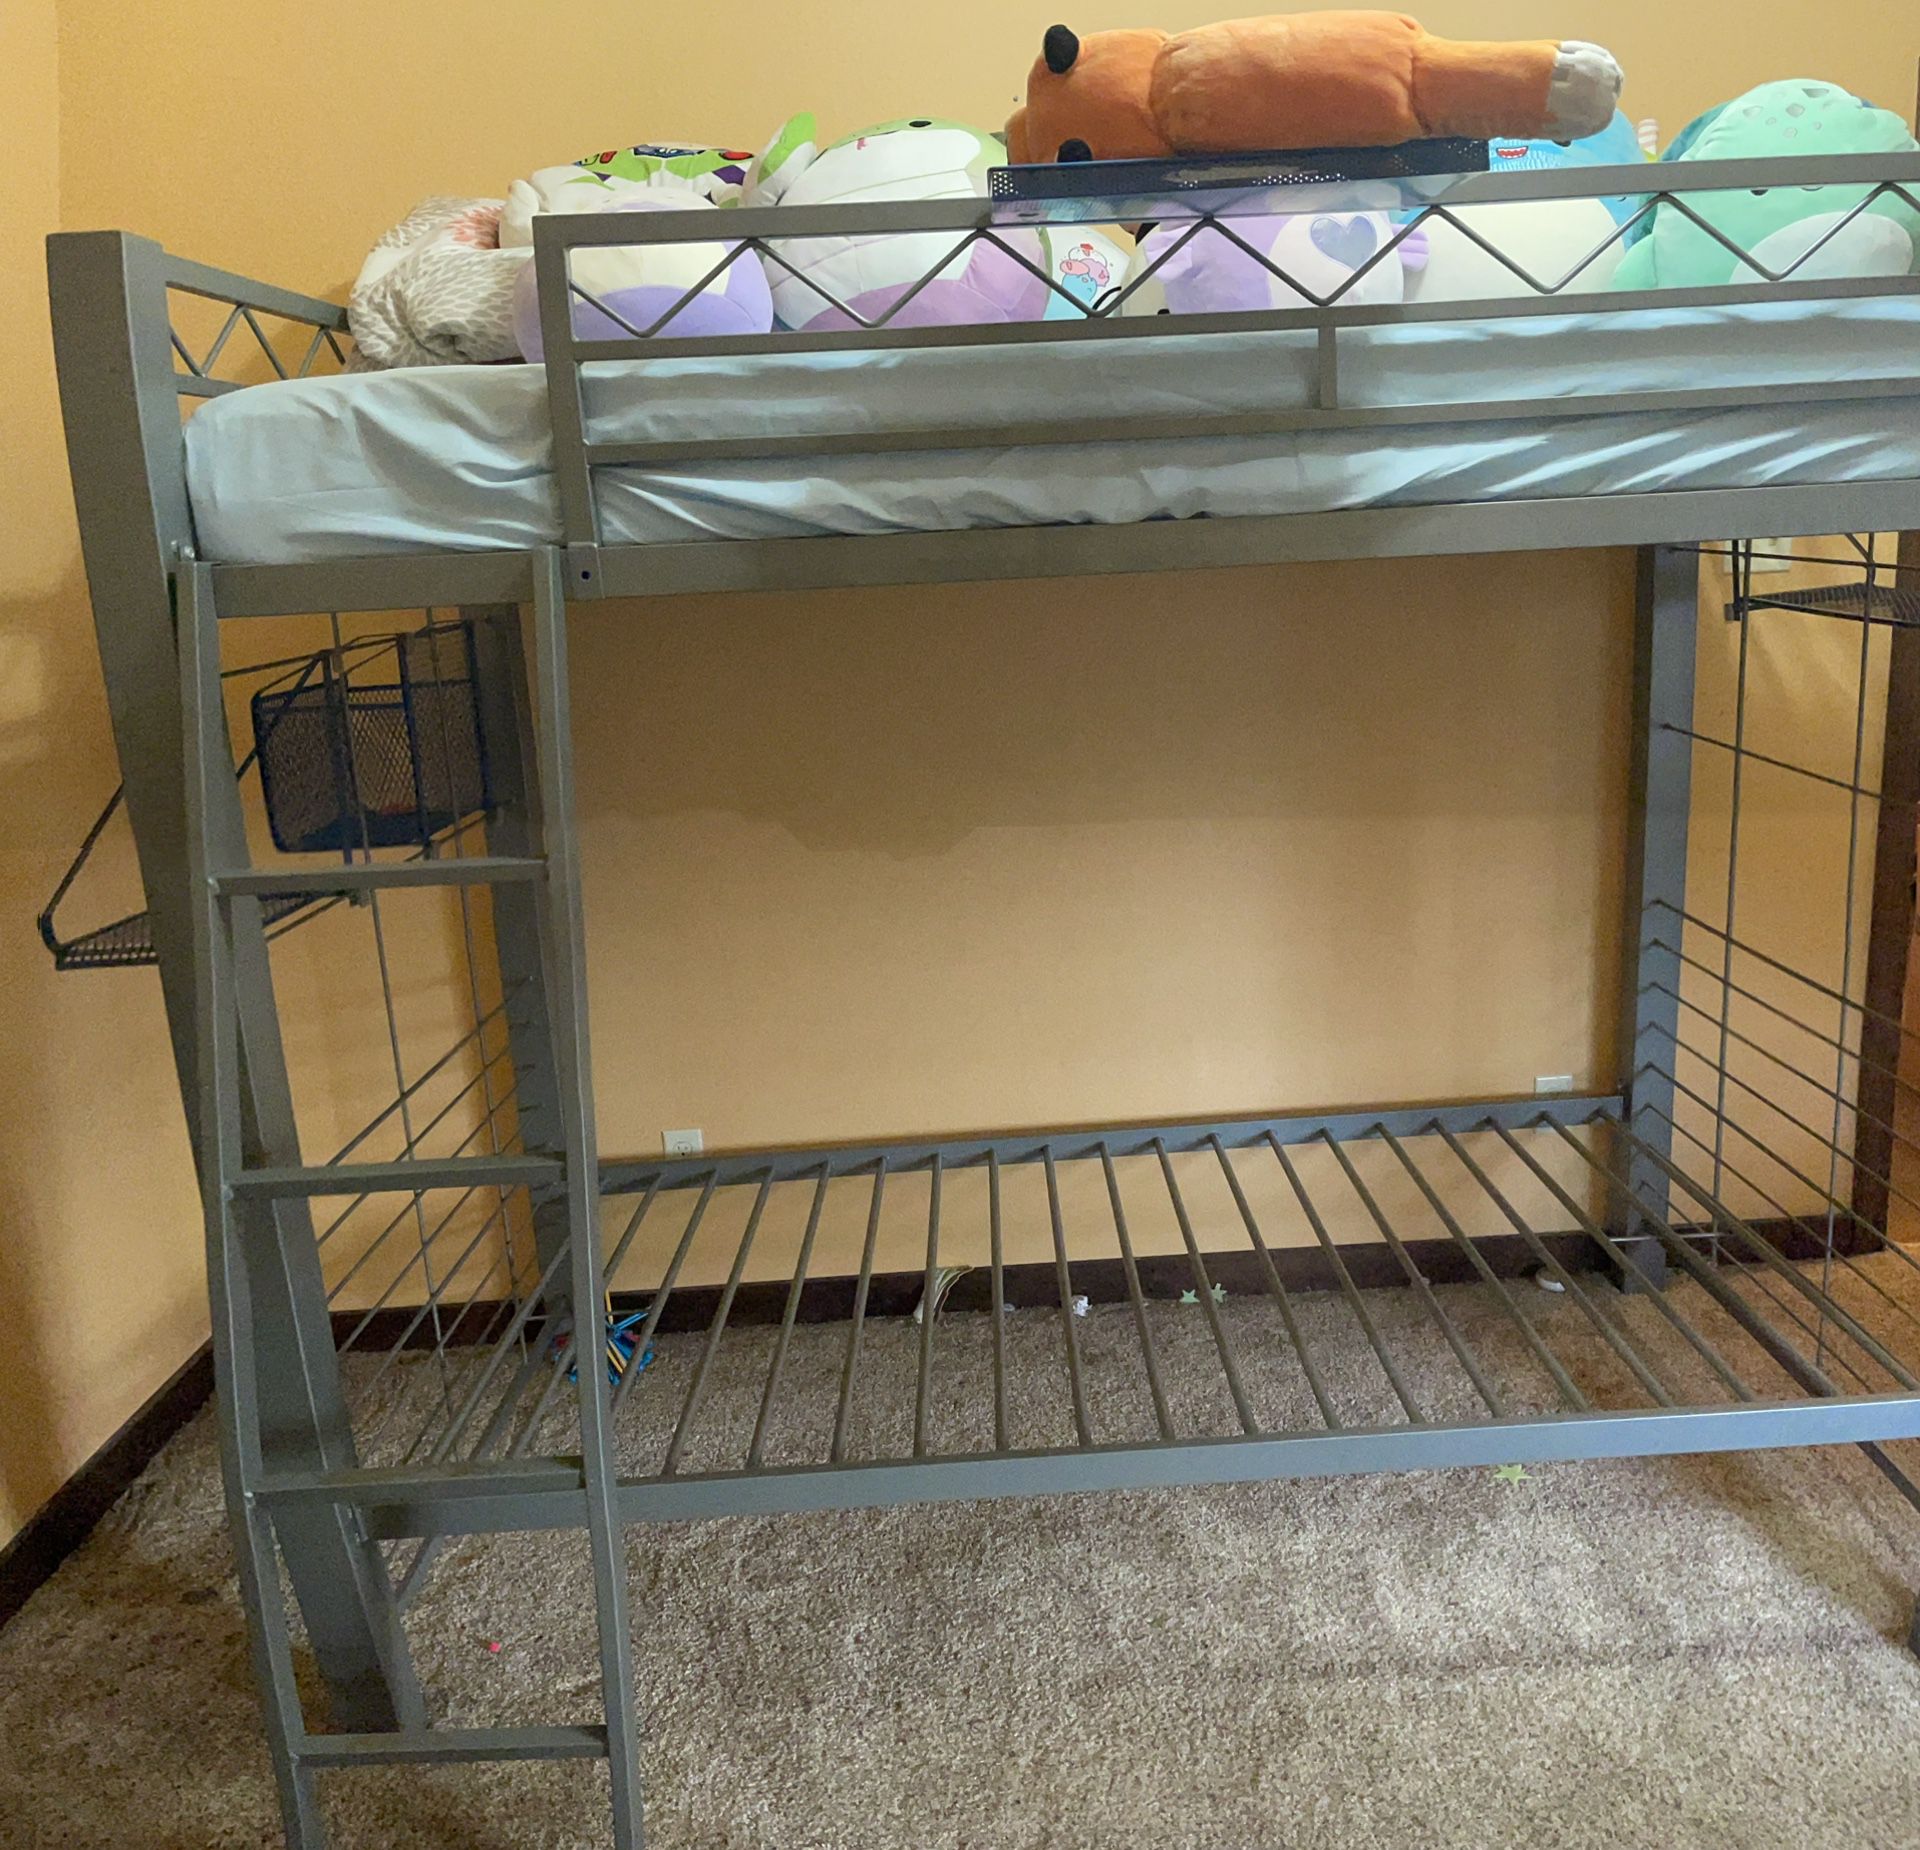 Bunk Bed with Blue Accessorie